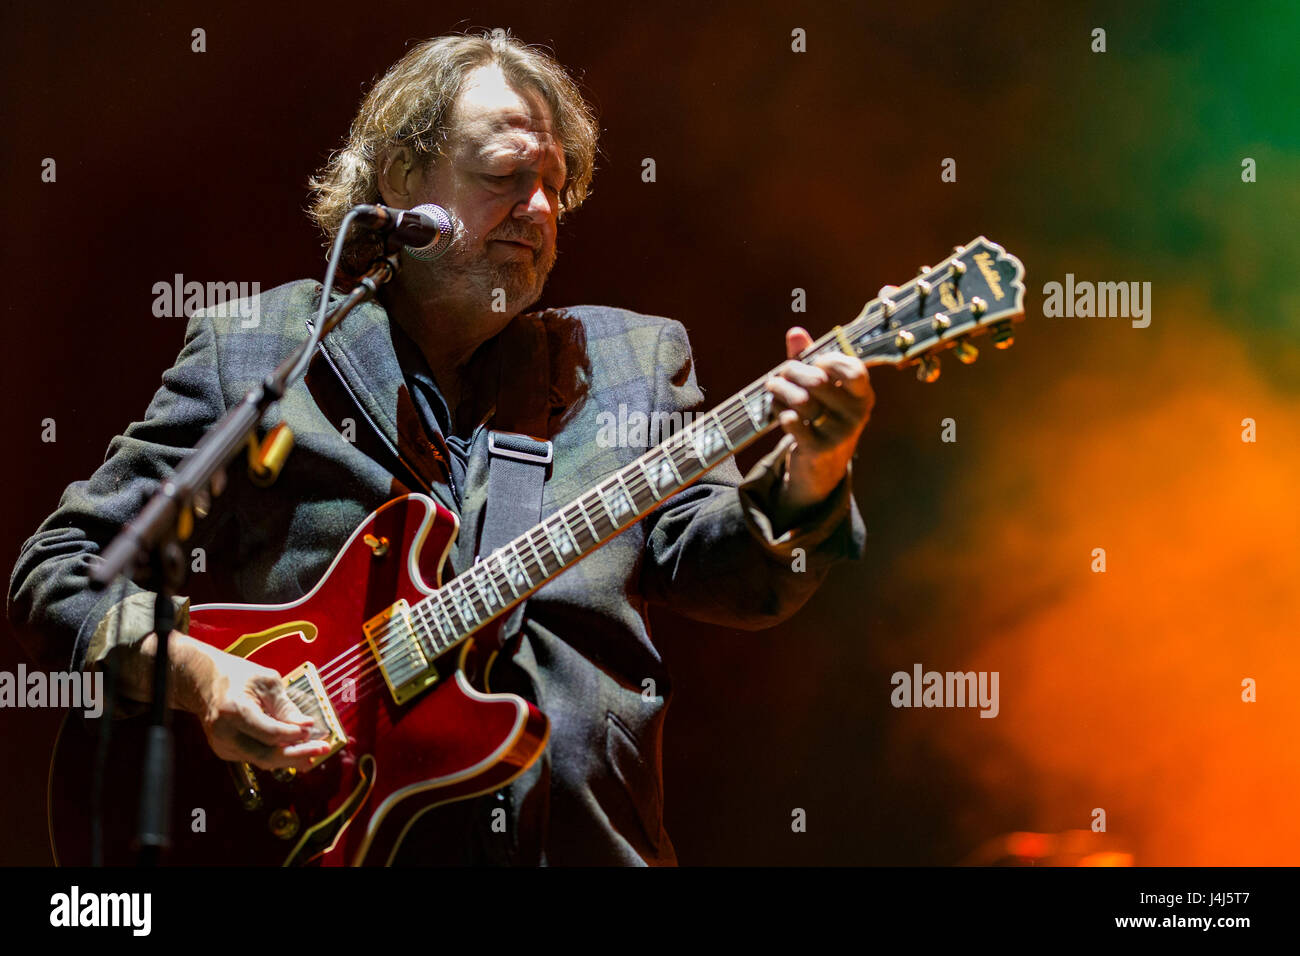 John Bell, vocalist of Widespread Panic performs at the 2017 Beale Street Music Festival at Tom Lee Park in Memphis, Tenn. on May 5, 2017. Stock Photo